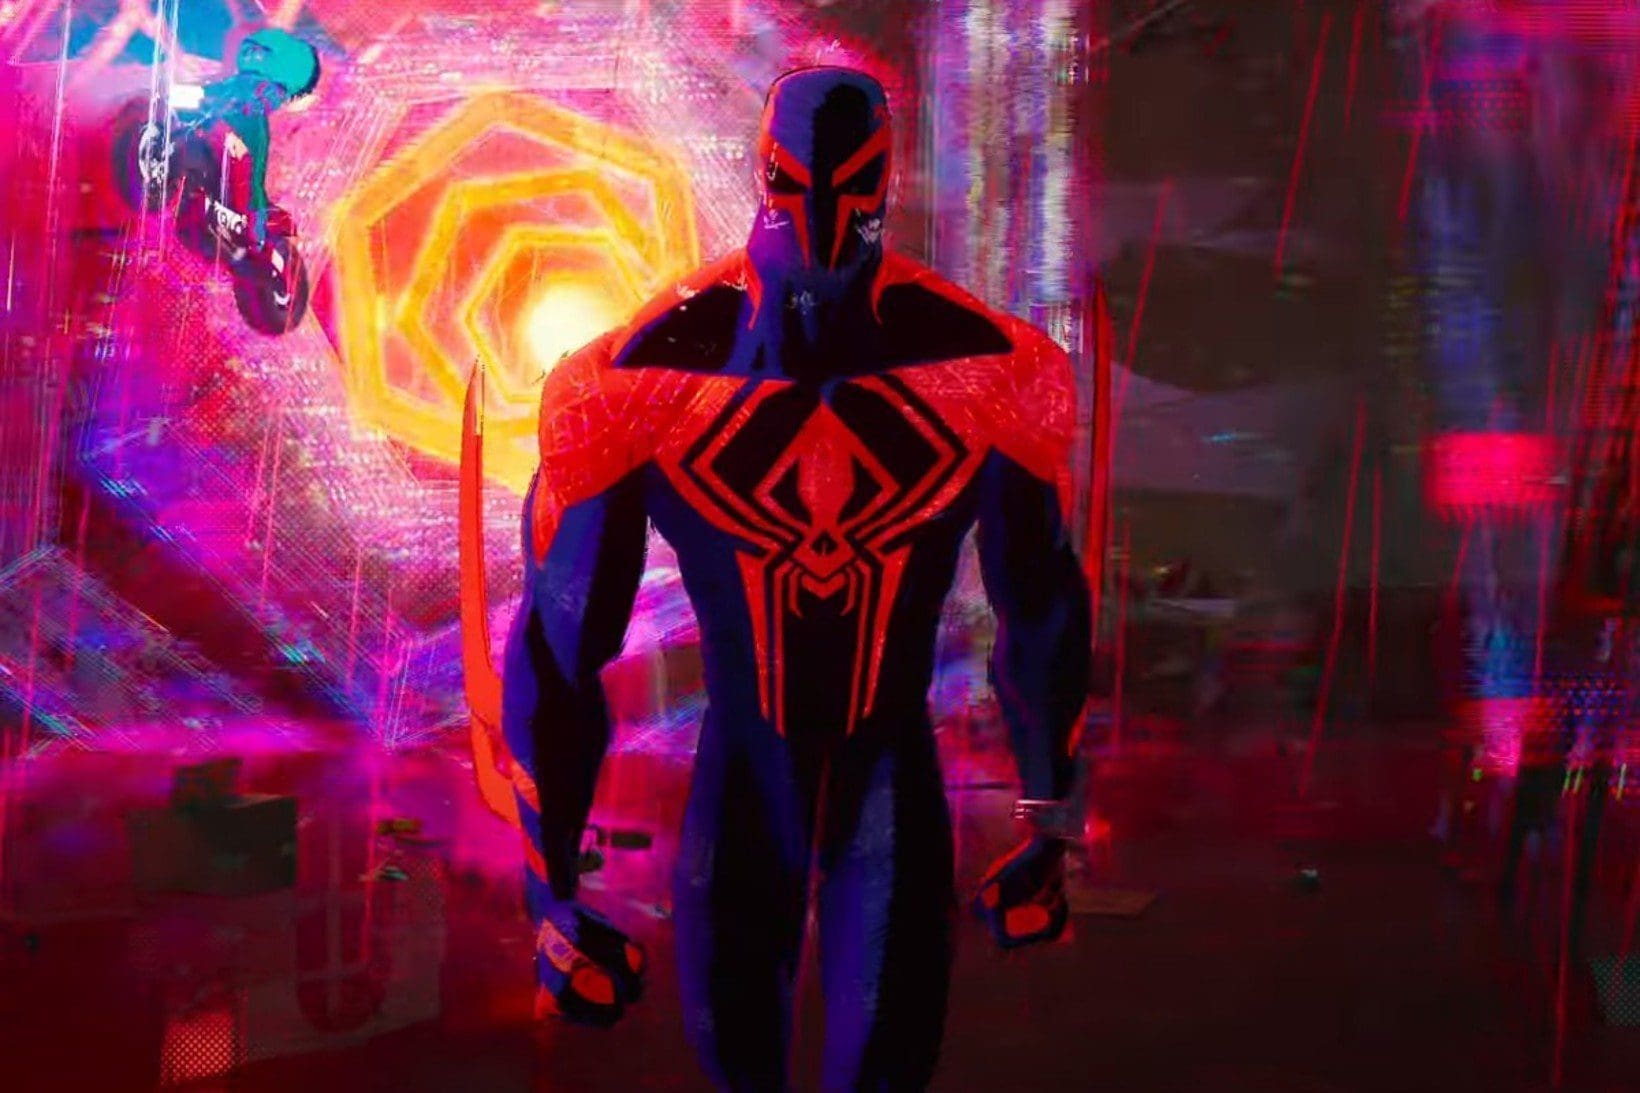 hailee steinfeld, miles morales, movie review, Oscar Isaac, Shameik Moore, sony pictures, spider-man, Spider-Man Across The Spider-Verse